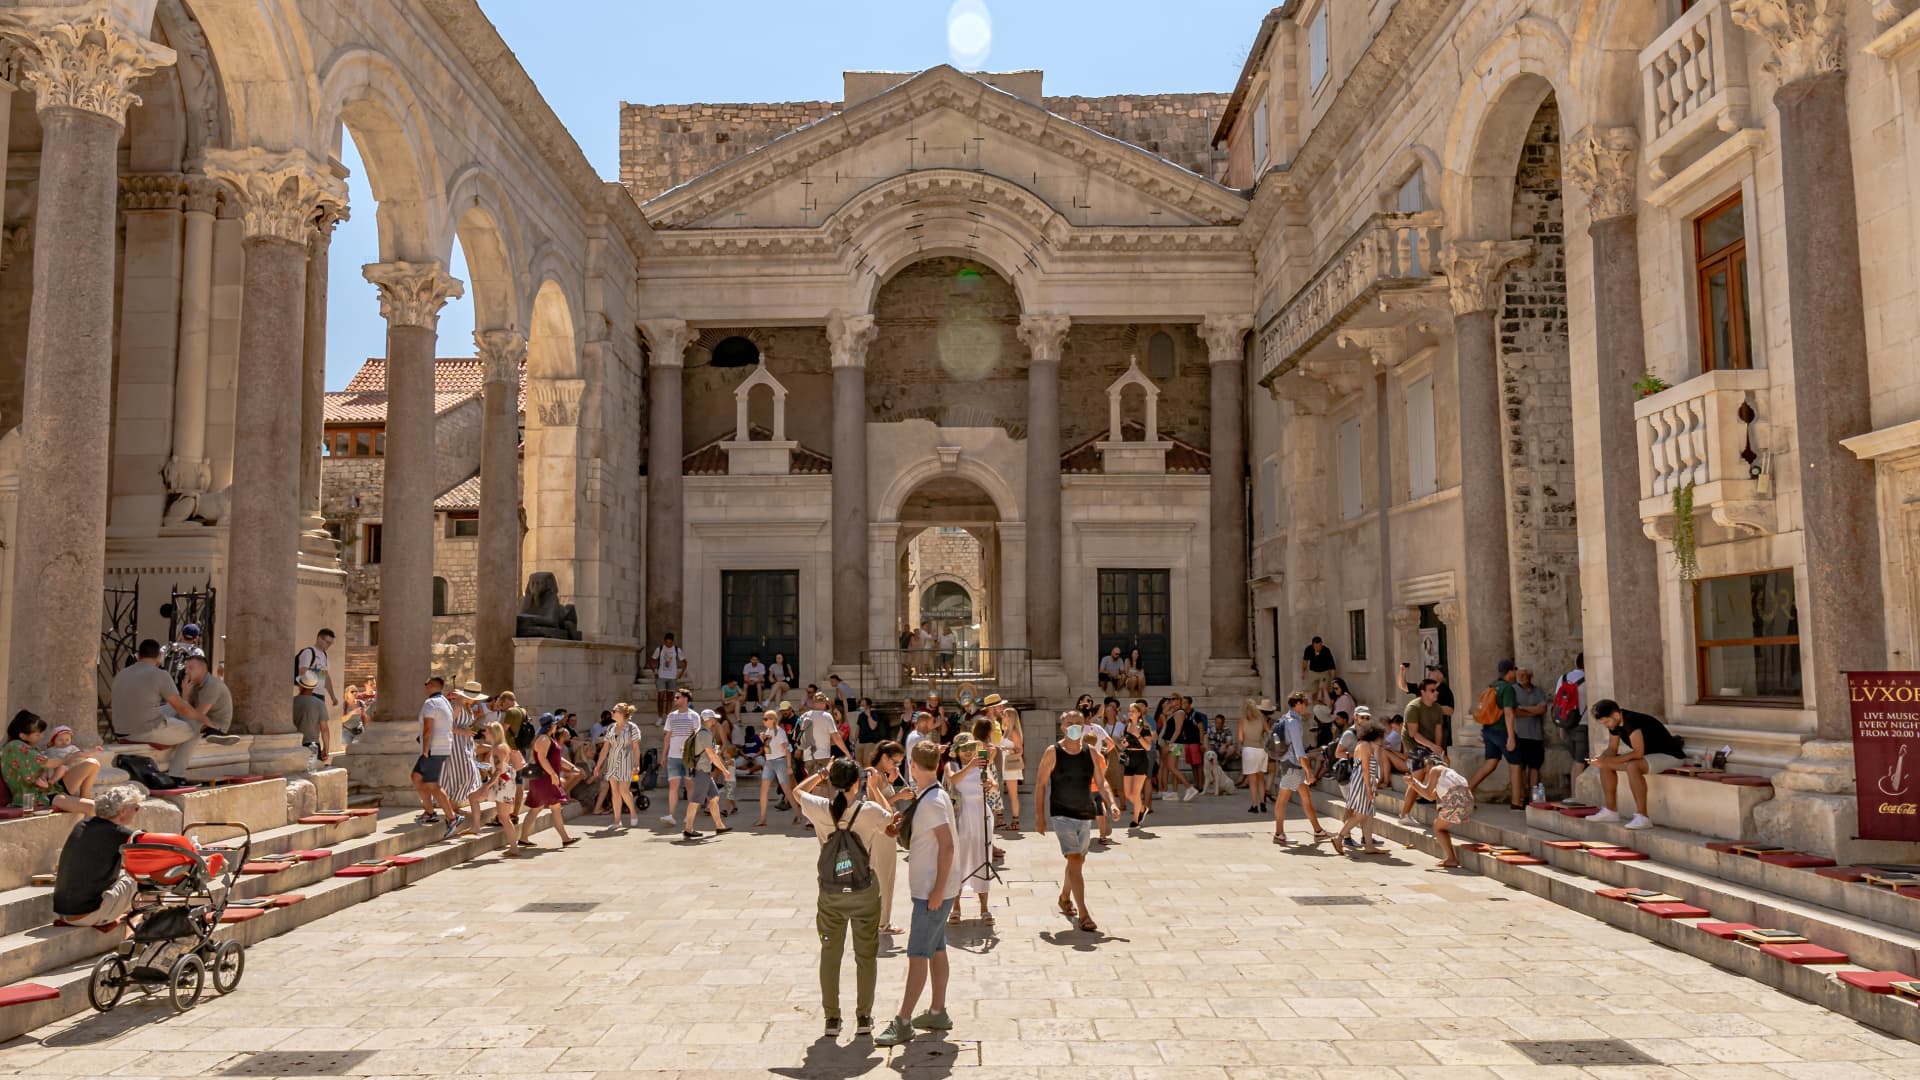 The famed ruins of Diocletian's Palace